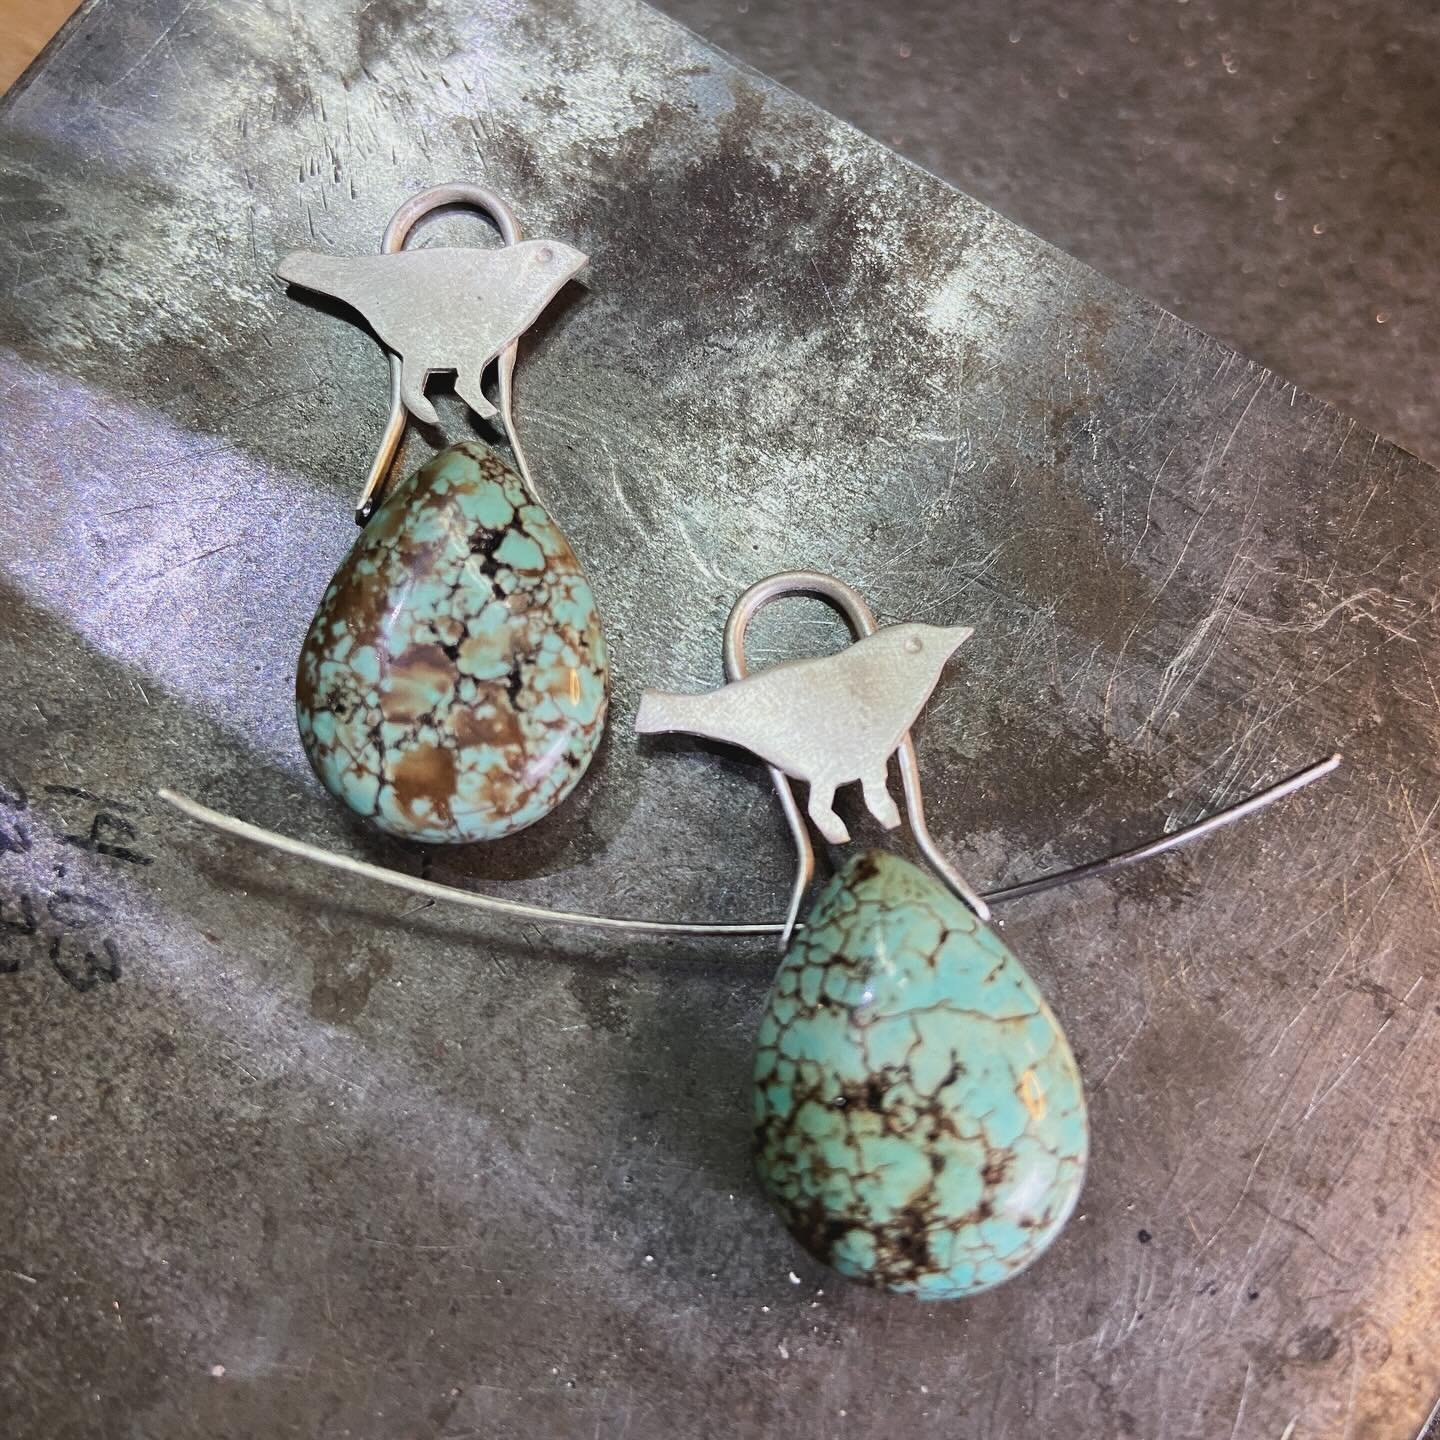 Lots of odds and ends on the bench today ~ birds and turquoise, flowers and turquoise. Hopefully some turquoise rings next week&hellip;

#workinprogressjewelry #birdjewelry #putabirdonit #artisanjewelry #whidbeyartmarket #whidbeyislandartist #mybrown